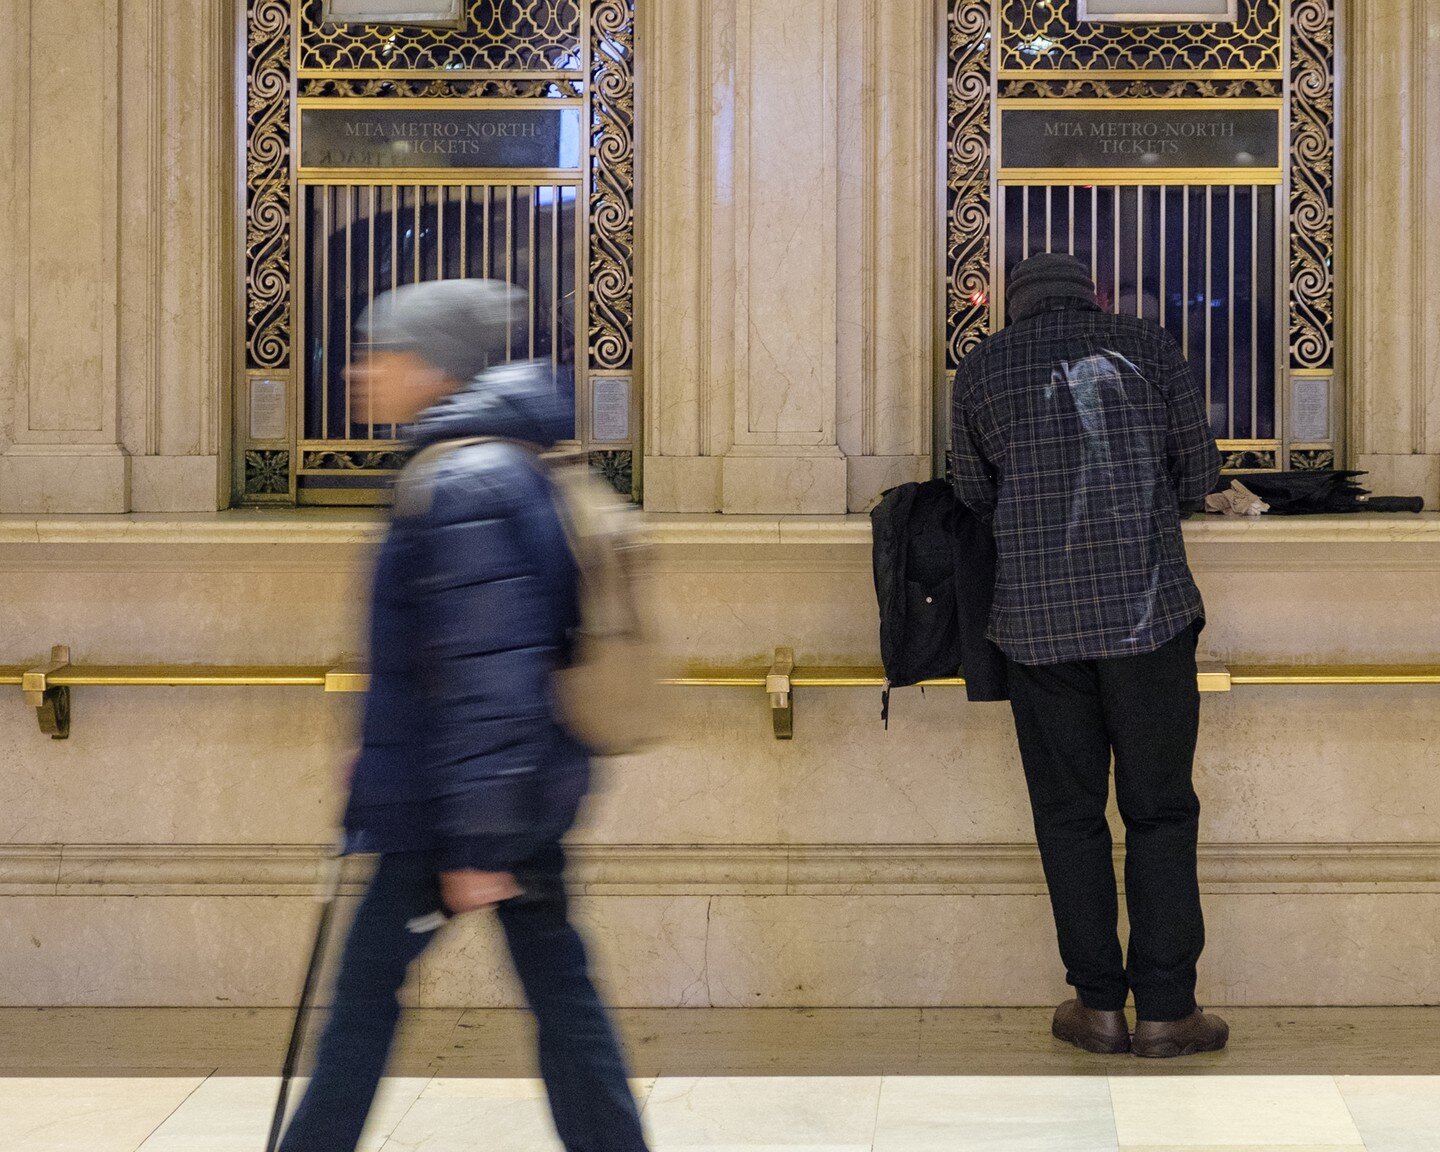 Normal People
(Grand Central Terminal, New York, US)

@grandcentralnyc @love.gct #newyork #nyc #manhattan #grandcentral @newyork @newyorkcity.explore #Normalpeople #travellinglightclub #streetphotography